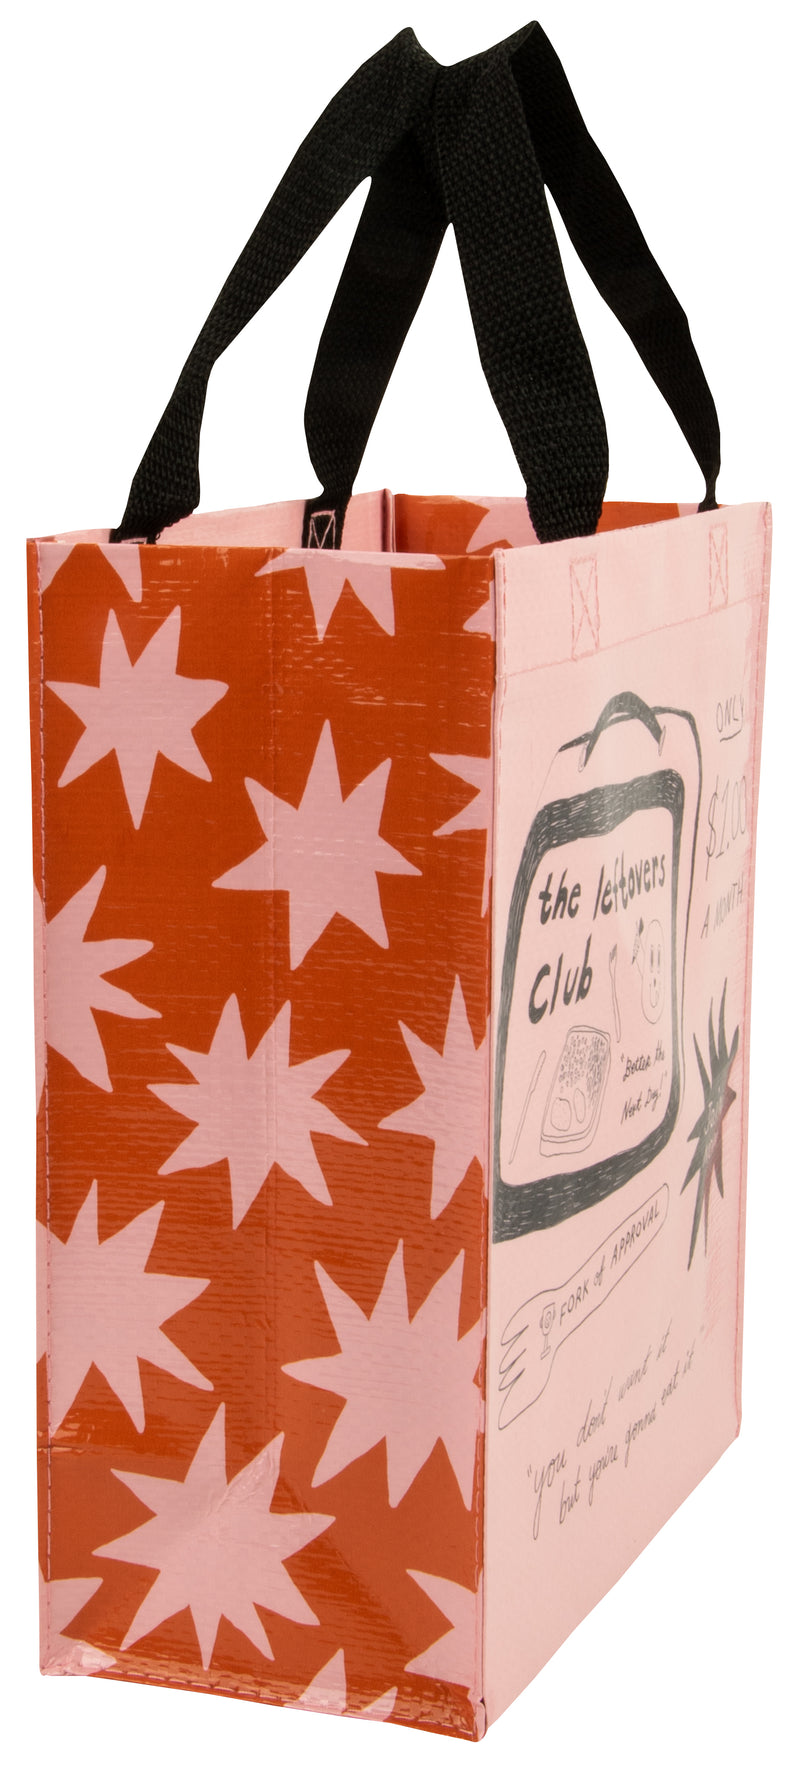 Handy Tote | The Leftovers Club Tote Bags Blue Q  Paper Skyscraper Gift Shop Charlotte